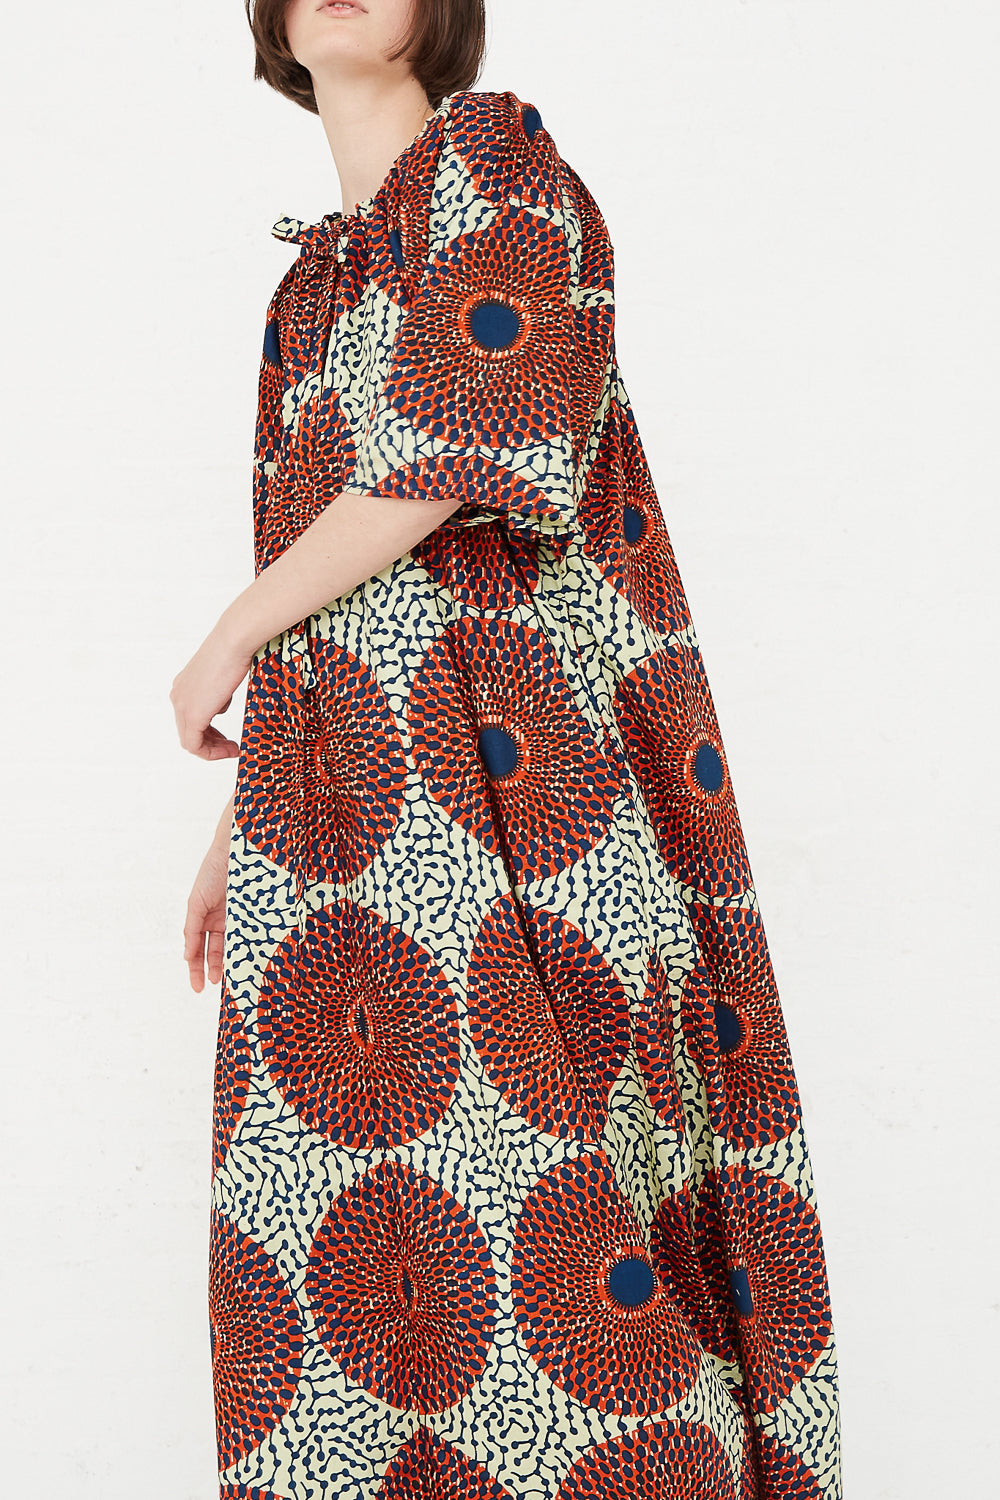 Odile Jacobs - Arabelle Dress in Rust Circles side detail